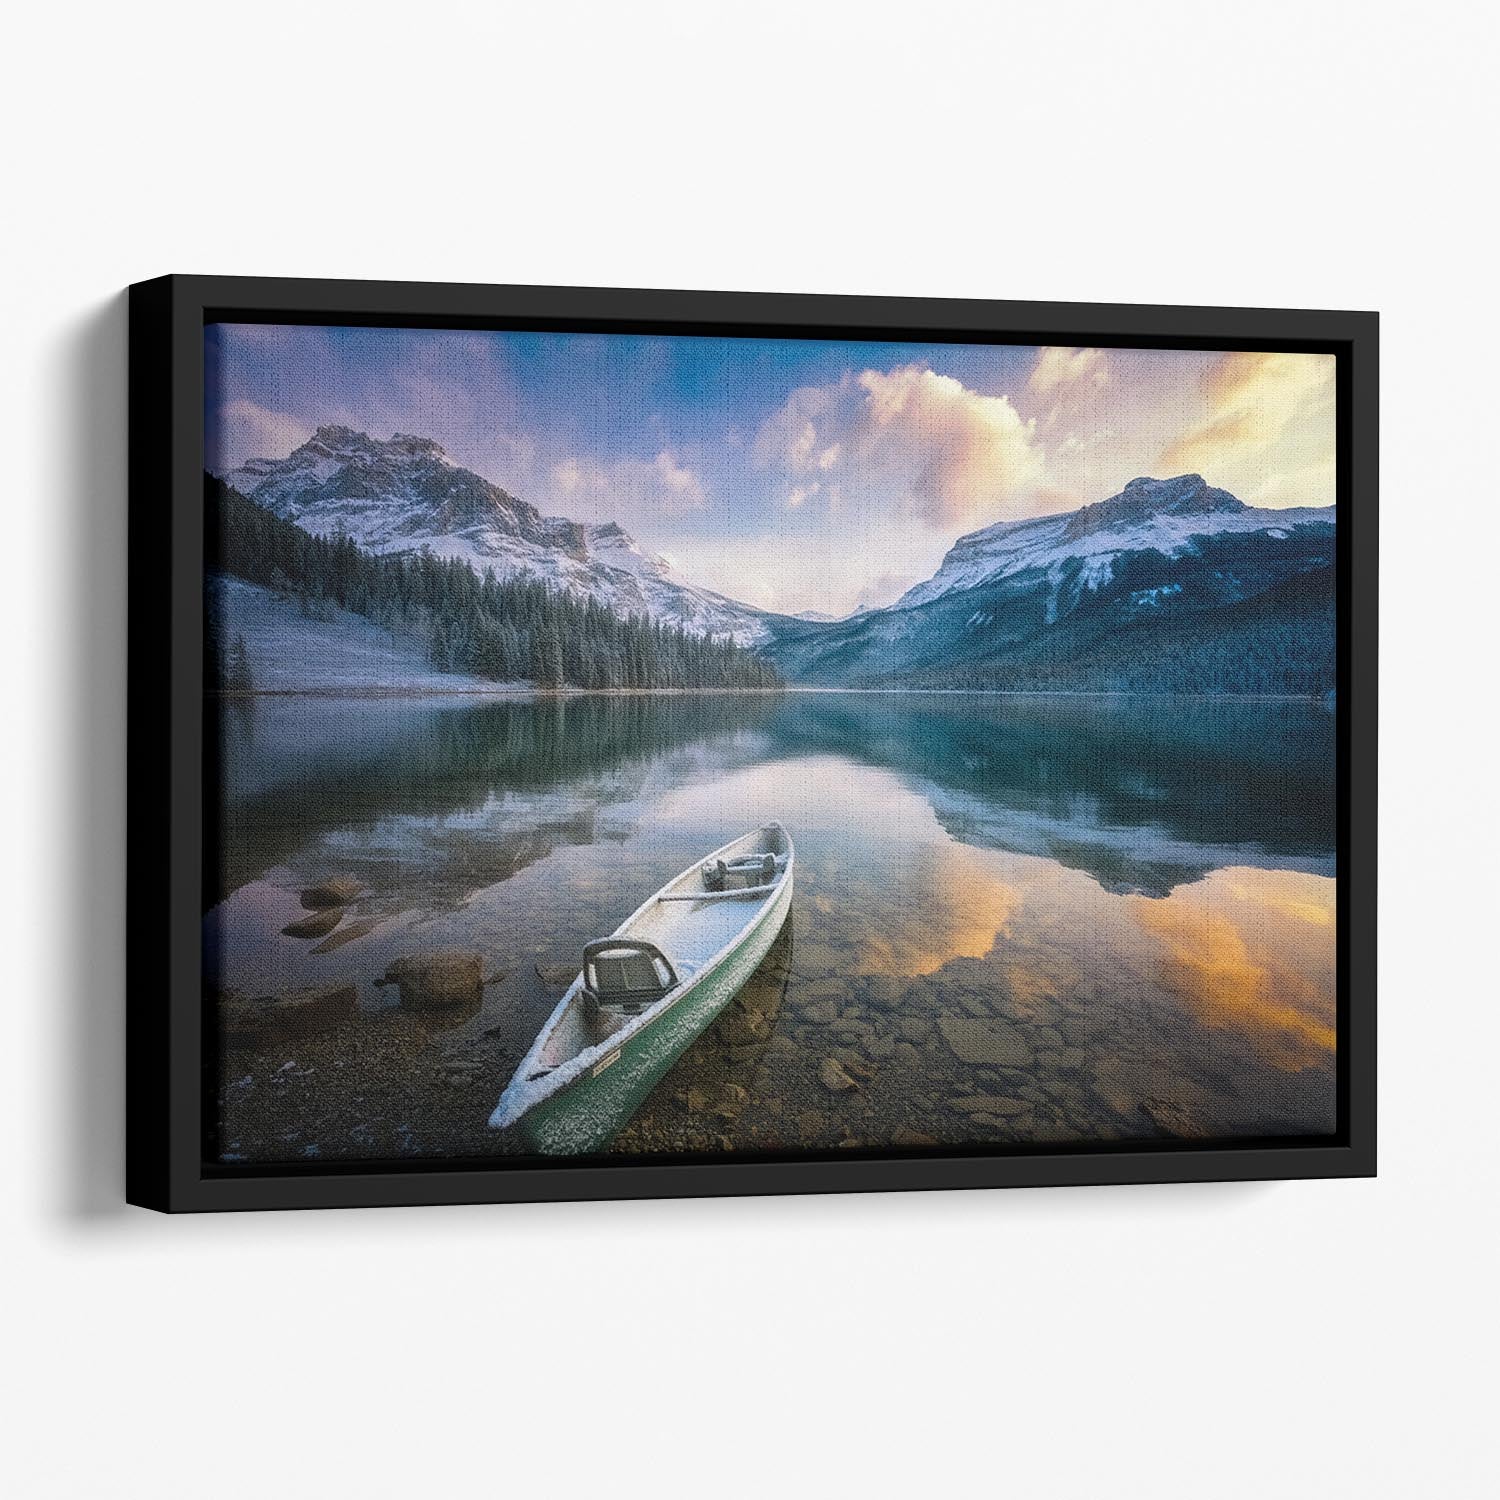 First Snow Emerald Lake Floating Framed Canvas - Canvas Art Rocks - 1